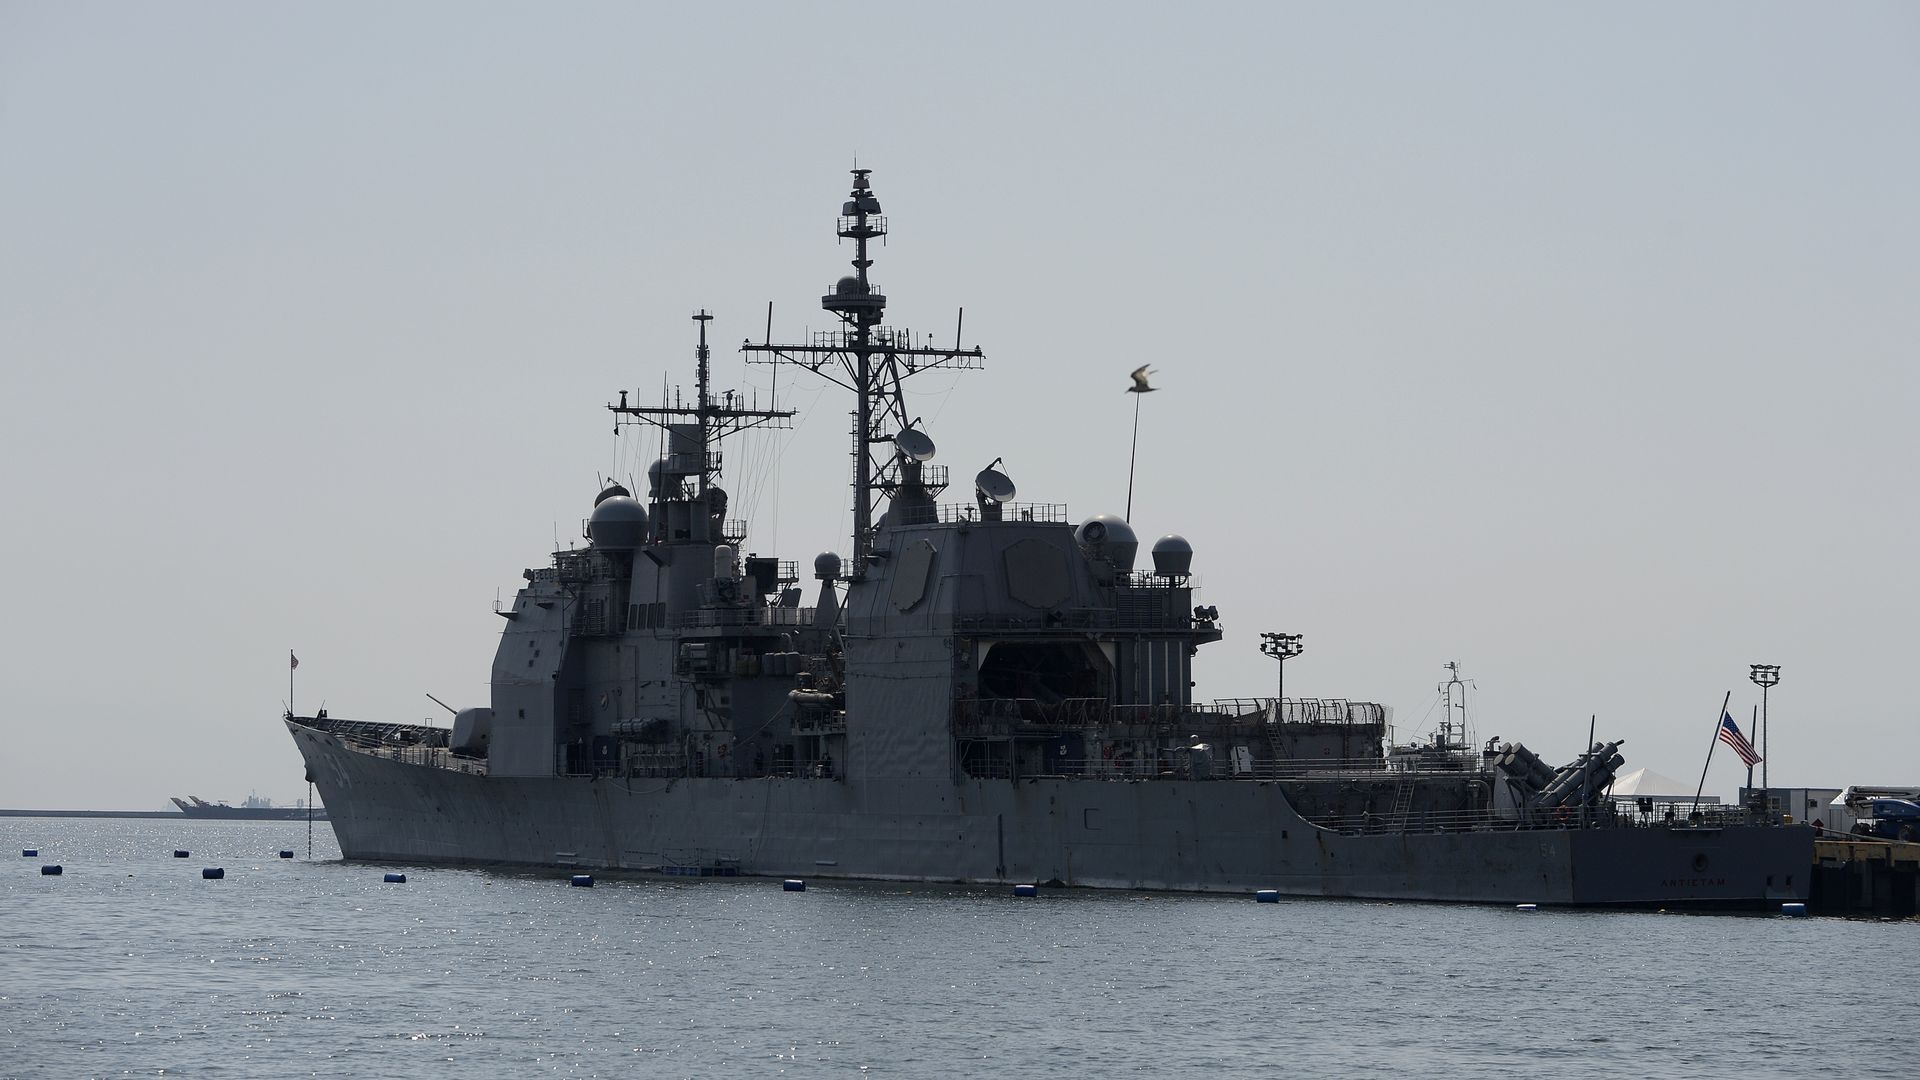 The US Navy's guided missile cruiser USS Antietam (CG-54) is seen docked at a port in Manila on March 14, 2016.